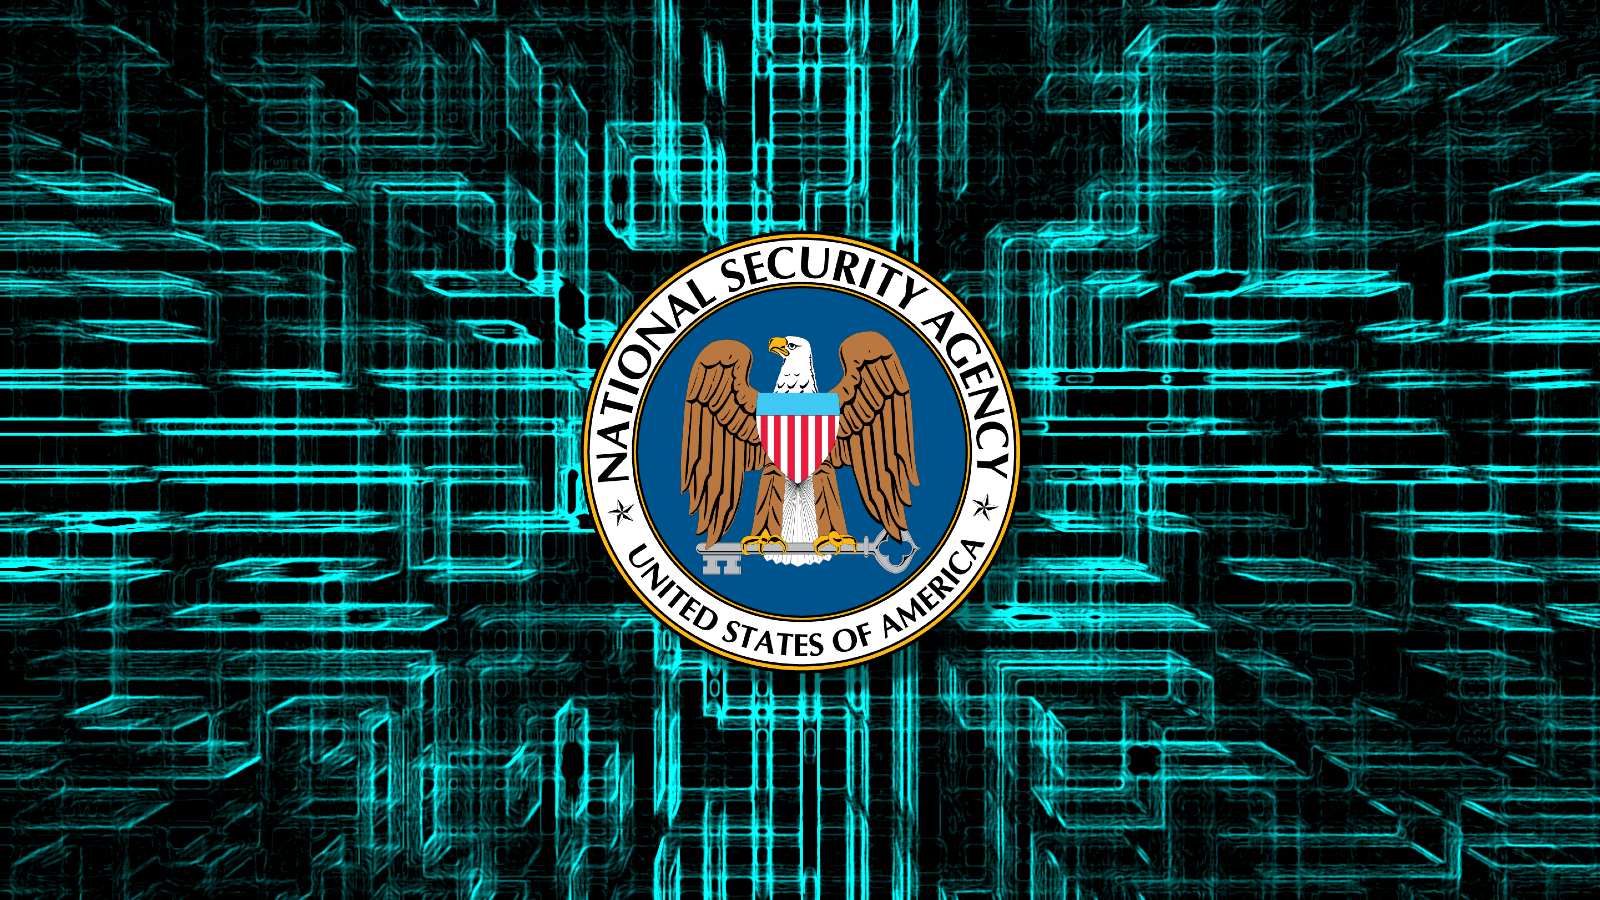 nsa-confirms-purchase-of-americans-internet-browsing-records-without-warrant